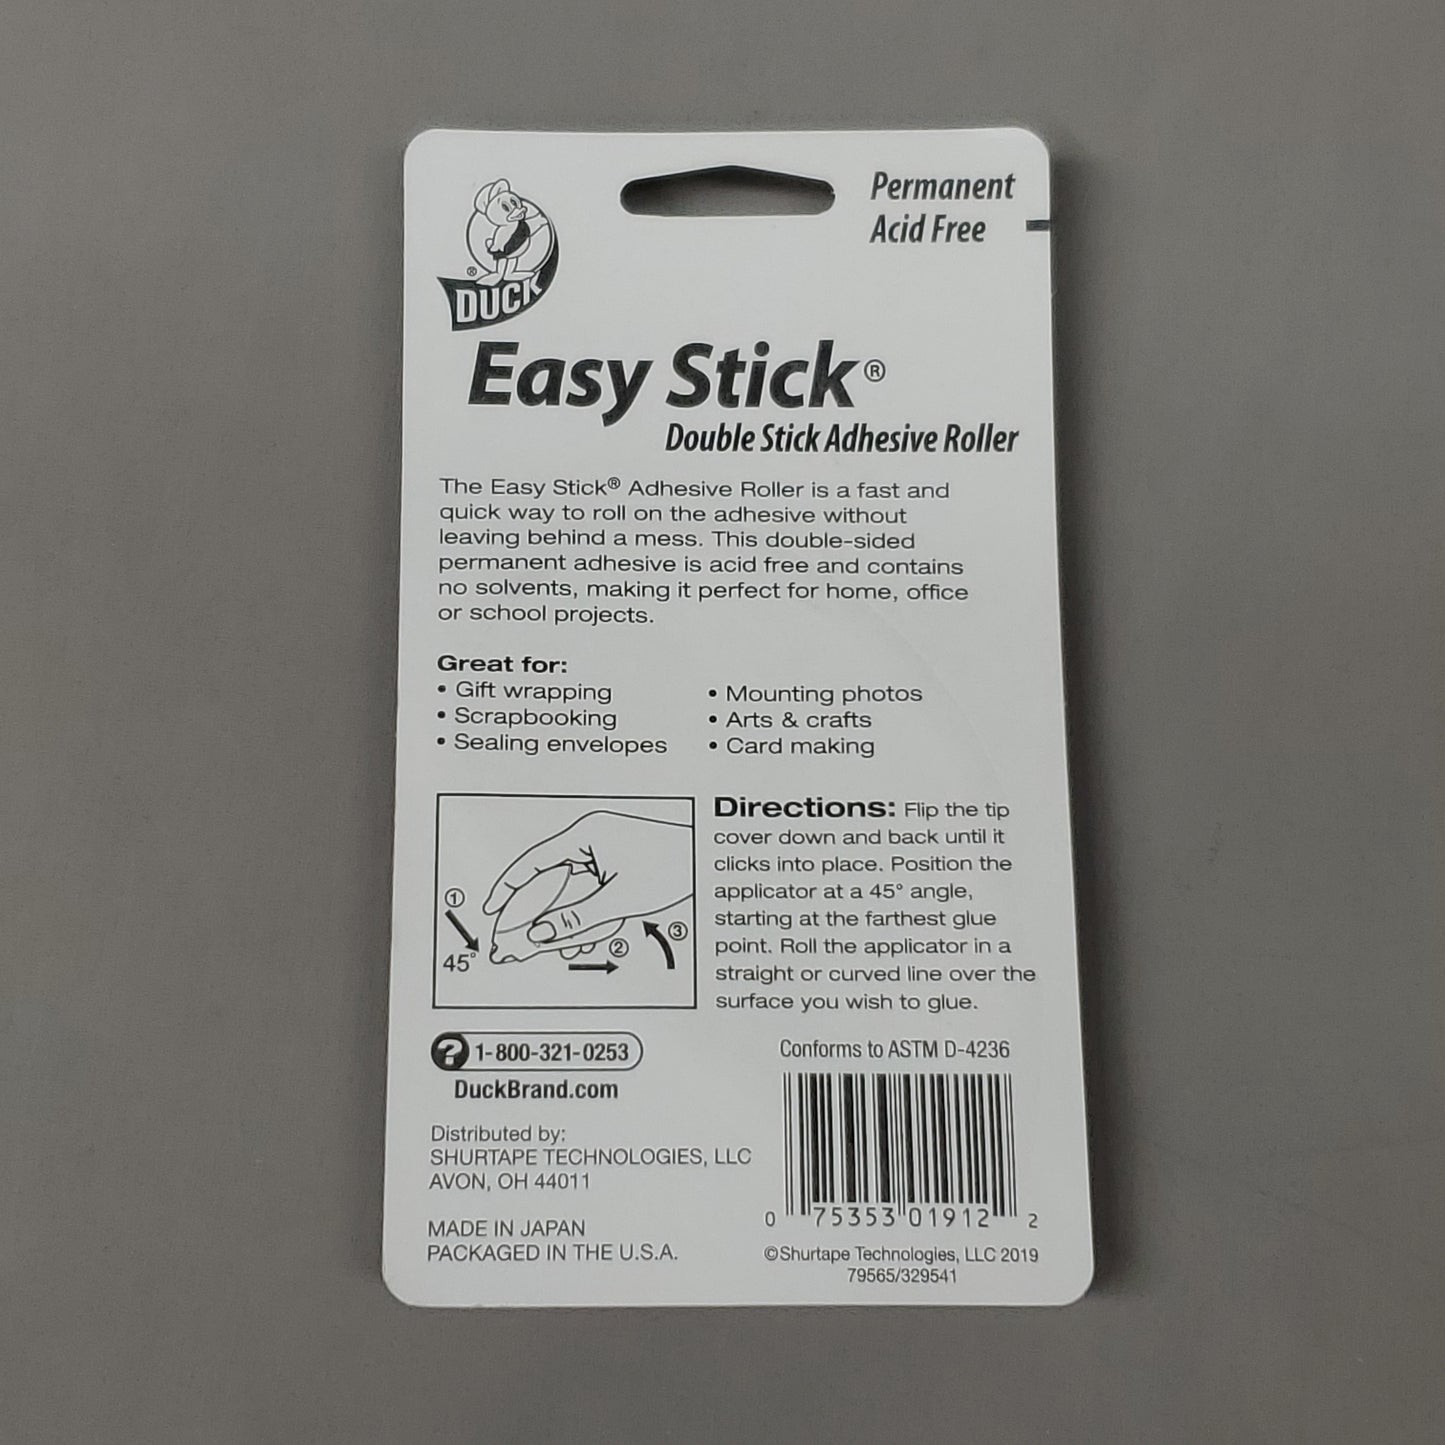 SHURTAPE 6 PK of Permanent Easy Stick Double Side Adhesive Roller .31"X21.3' 286749